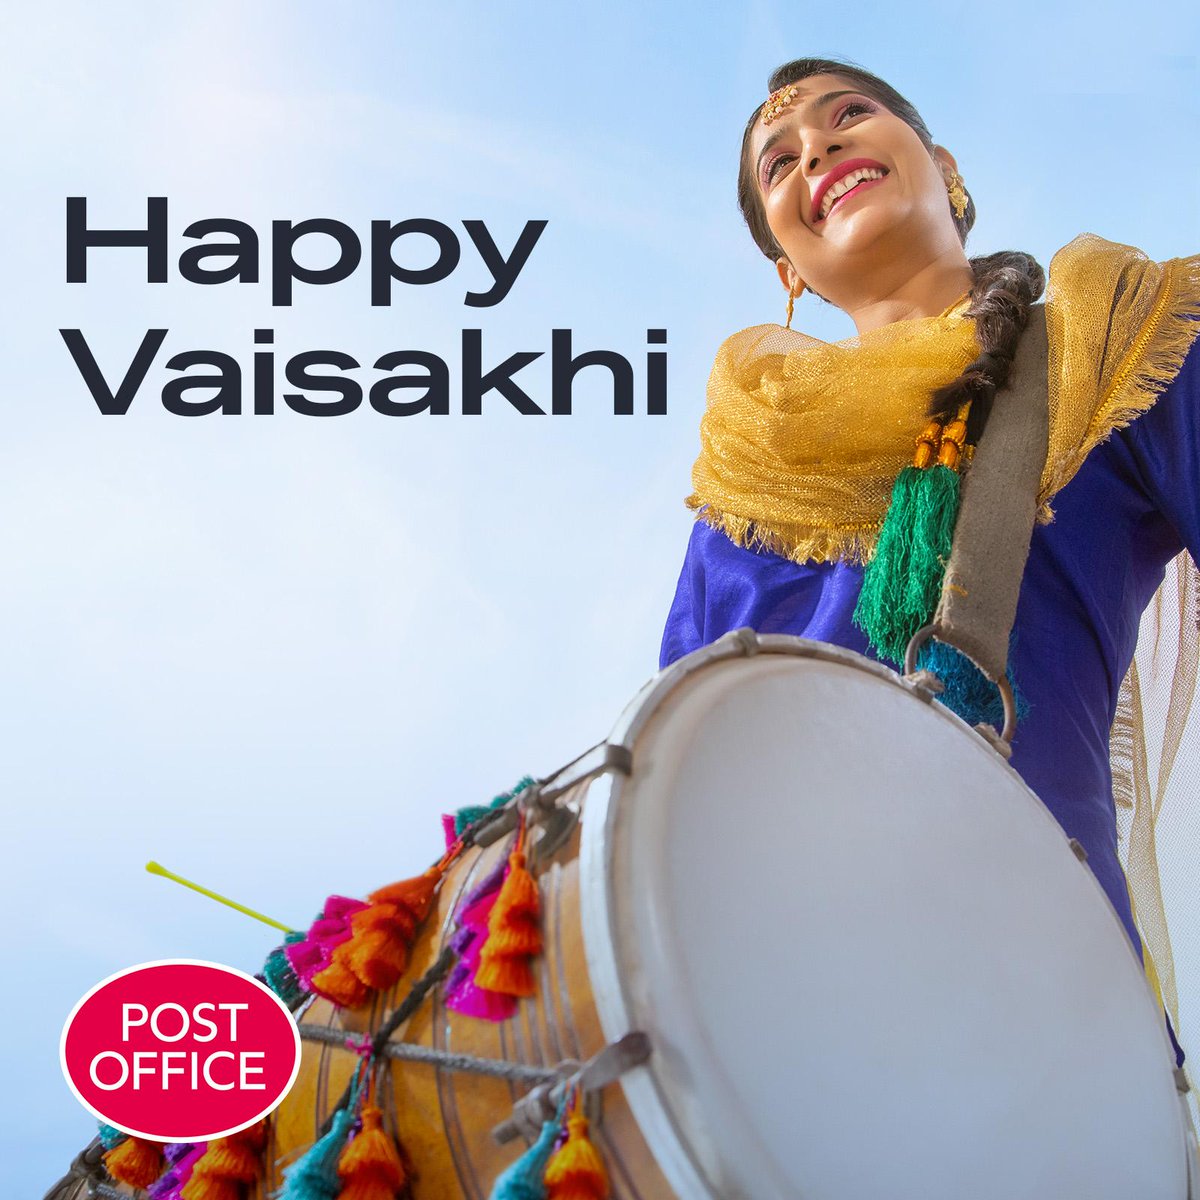 Happy Vaisakhi to all celebrating! Wishing you a day filled with joy, laughter, and delicious food. #Vaisakhi #FestivalOfHarvest 🎉🌾